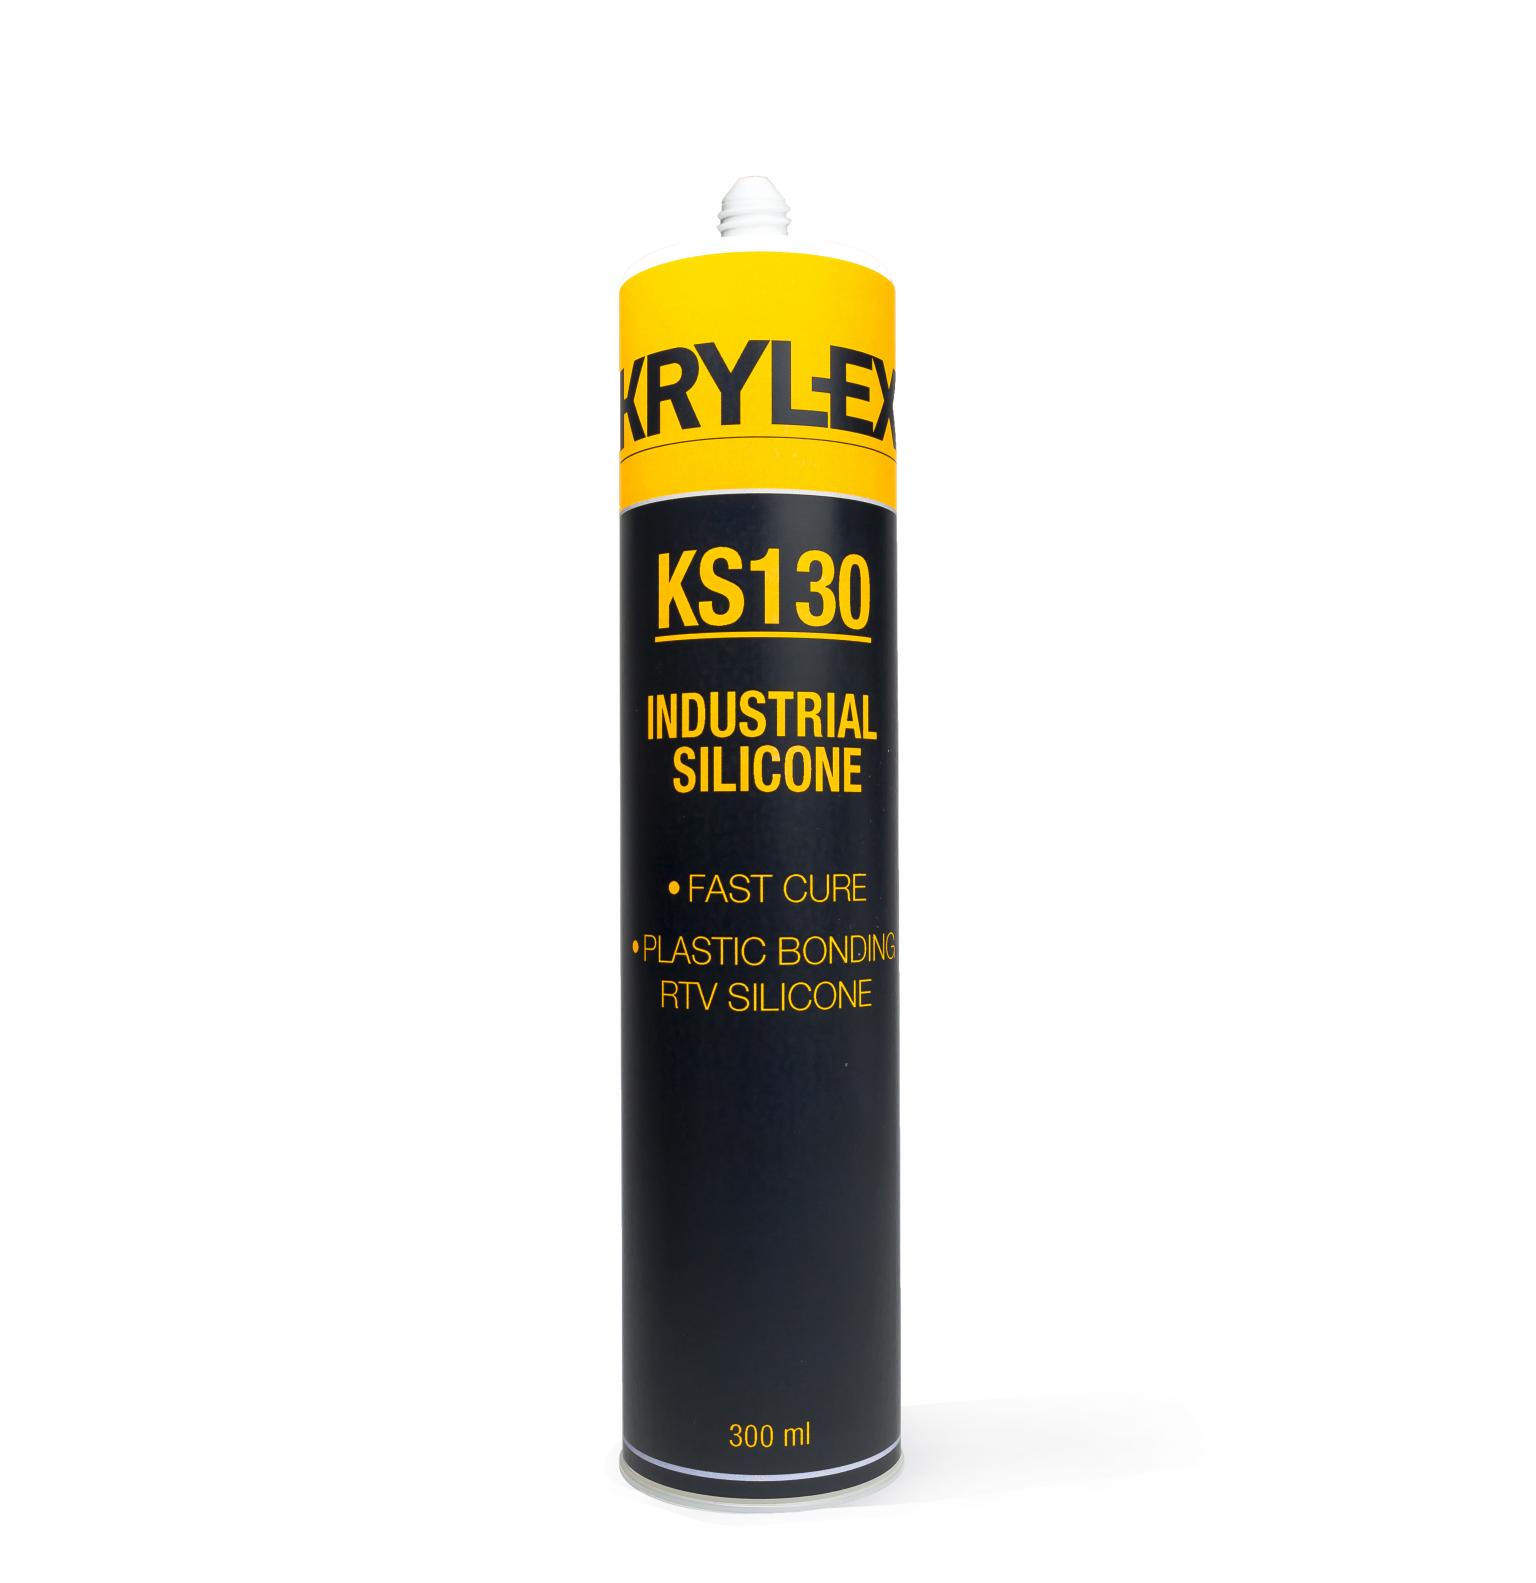 high performance RTV silicone with exceptional adhesion to hard to bond plastics